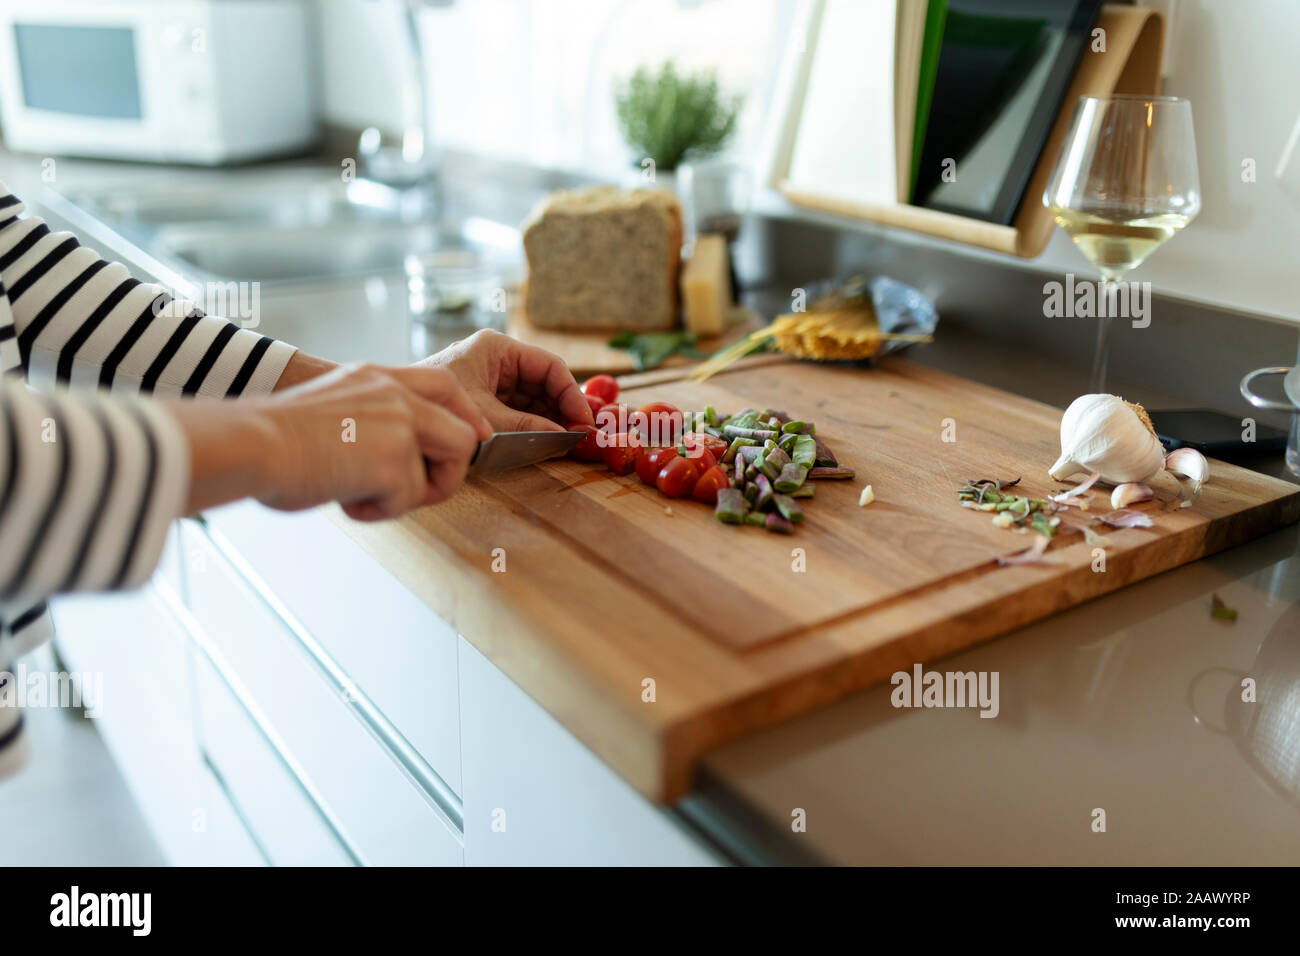 Close-up of woman cooking in kitchen at home cutting vegetables Stock Photo